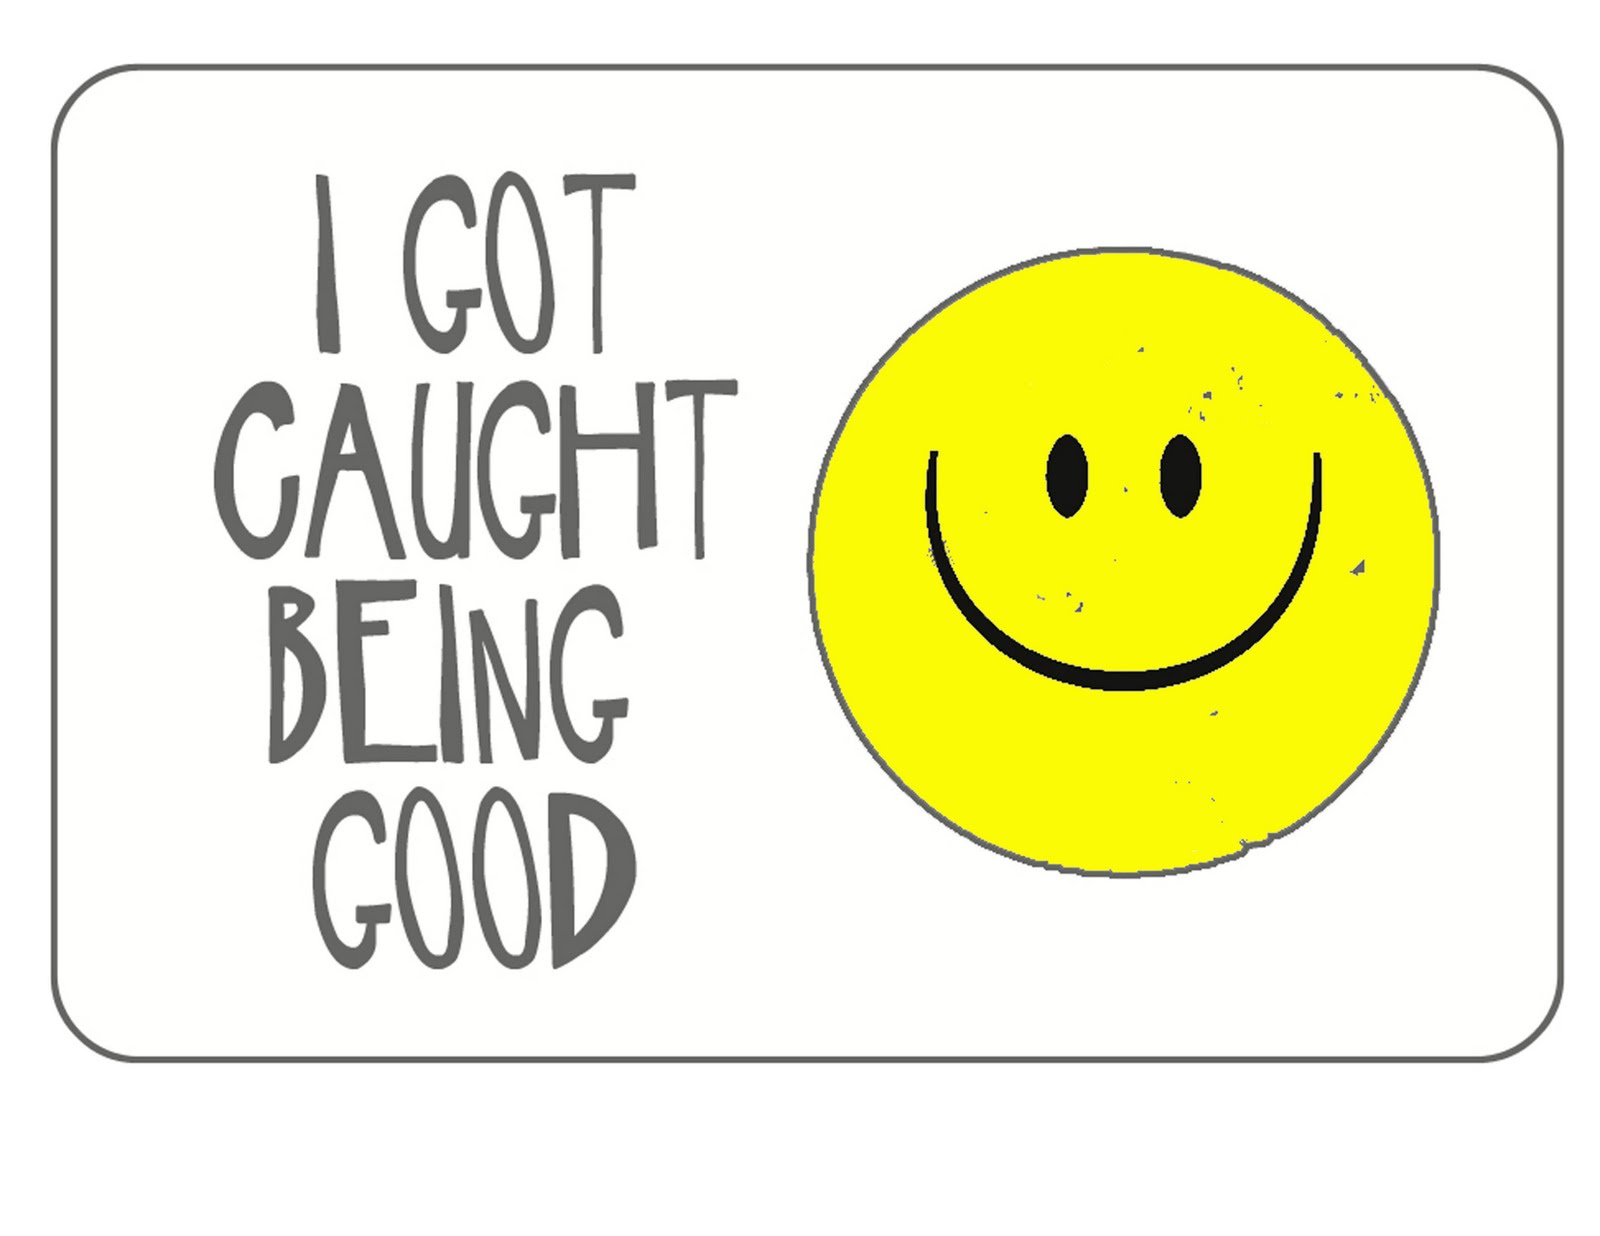 c-caught-you-being-good-tickets-template-printable